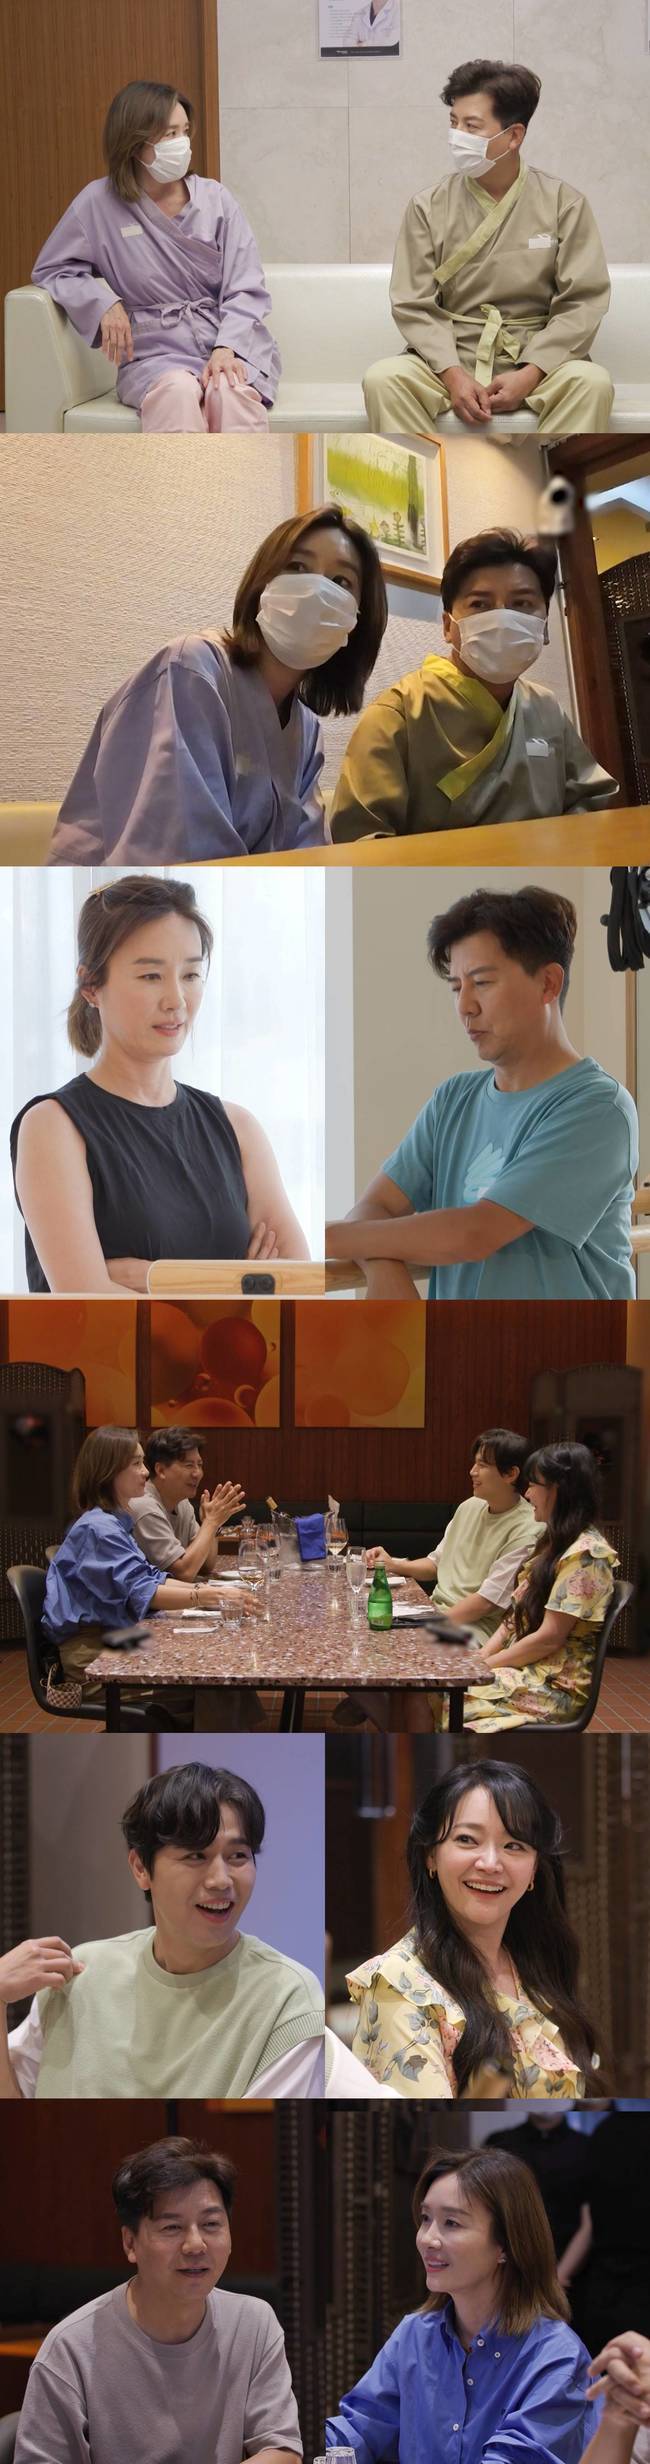 Son Ji Changs health has been given a red light.On July 10, SBS Same Bed, Different Dreams 2 Season 2 - You Are My Destiny, which is broadcasted at 10:10 pm, depicts Son Ji Chang and Oh Yeon-soo Couple in Health screenings.Recently, Son Ji Chang, Oh Yeon-soo Couple visited the hospital for health screenings.Oh Yeon-soo, who is regularly inspected for health care, has been worried that Son Ji Chang has been in the hospital for three or four years since he was examined.Sure enough, Son Ji Chang, who finished the test, was given a shocking diagnosis, and Oh Yeon-soos depth deepened.Even Son Ji Chang, who was unconcerned by the doctors statement that he might have to undergo general anesthesia and surgery, was puzzled. I wonder what happened to Son Ji Chang.Oh Yeon-soo has taken extraordinary steps to help Son Ji Chang take care of his health.Son Ji Chang, who was in front of the questioning device for the first time in his life, showed a sense of tension when he saw Oh Yeon-soos skillful demonstration and said that he was not a torture device.Oh Yeon-soo was impressed with the elegant flexibility of a swan, while Son Ji Chang laughed at the studio with the stiffness of the basketball star.Oh Yeon-soo is not so good?  ⁇   ⁇   ⁇ ,  ⁇   ⁇  It is too much of a turtle neck  ⁇   ⁇   ⁇   ⁇   ⁇   ⁇   ⁇   ⁇   ⁇   ⁇   ⁇   ⁇   ⁇   ⁇   ⁇   ⁇   ⁇   ⁇   ⁇   ⁇   ⁇   ⁇   ⁇   ⁇   ⁇   ⁇   ⁇   ⁇   ⁇   ⁇   ⁇   ⁇   ⁇   ⁇   ⁇   ⁇   ⁇   ⁇   ⁇   ⁇   ⁇ ,